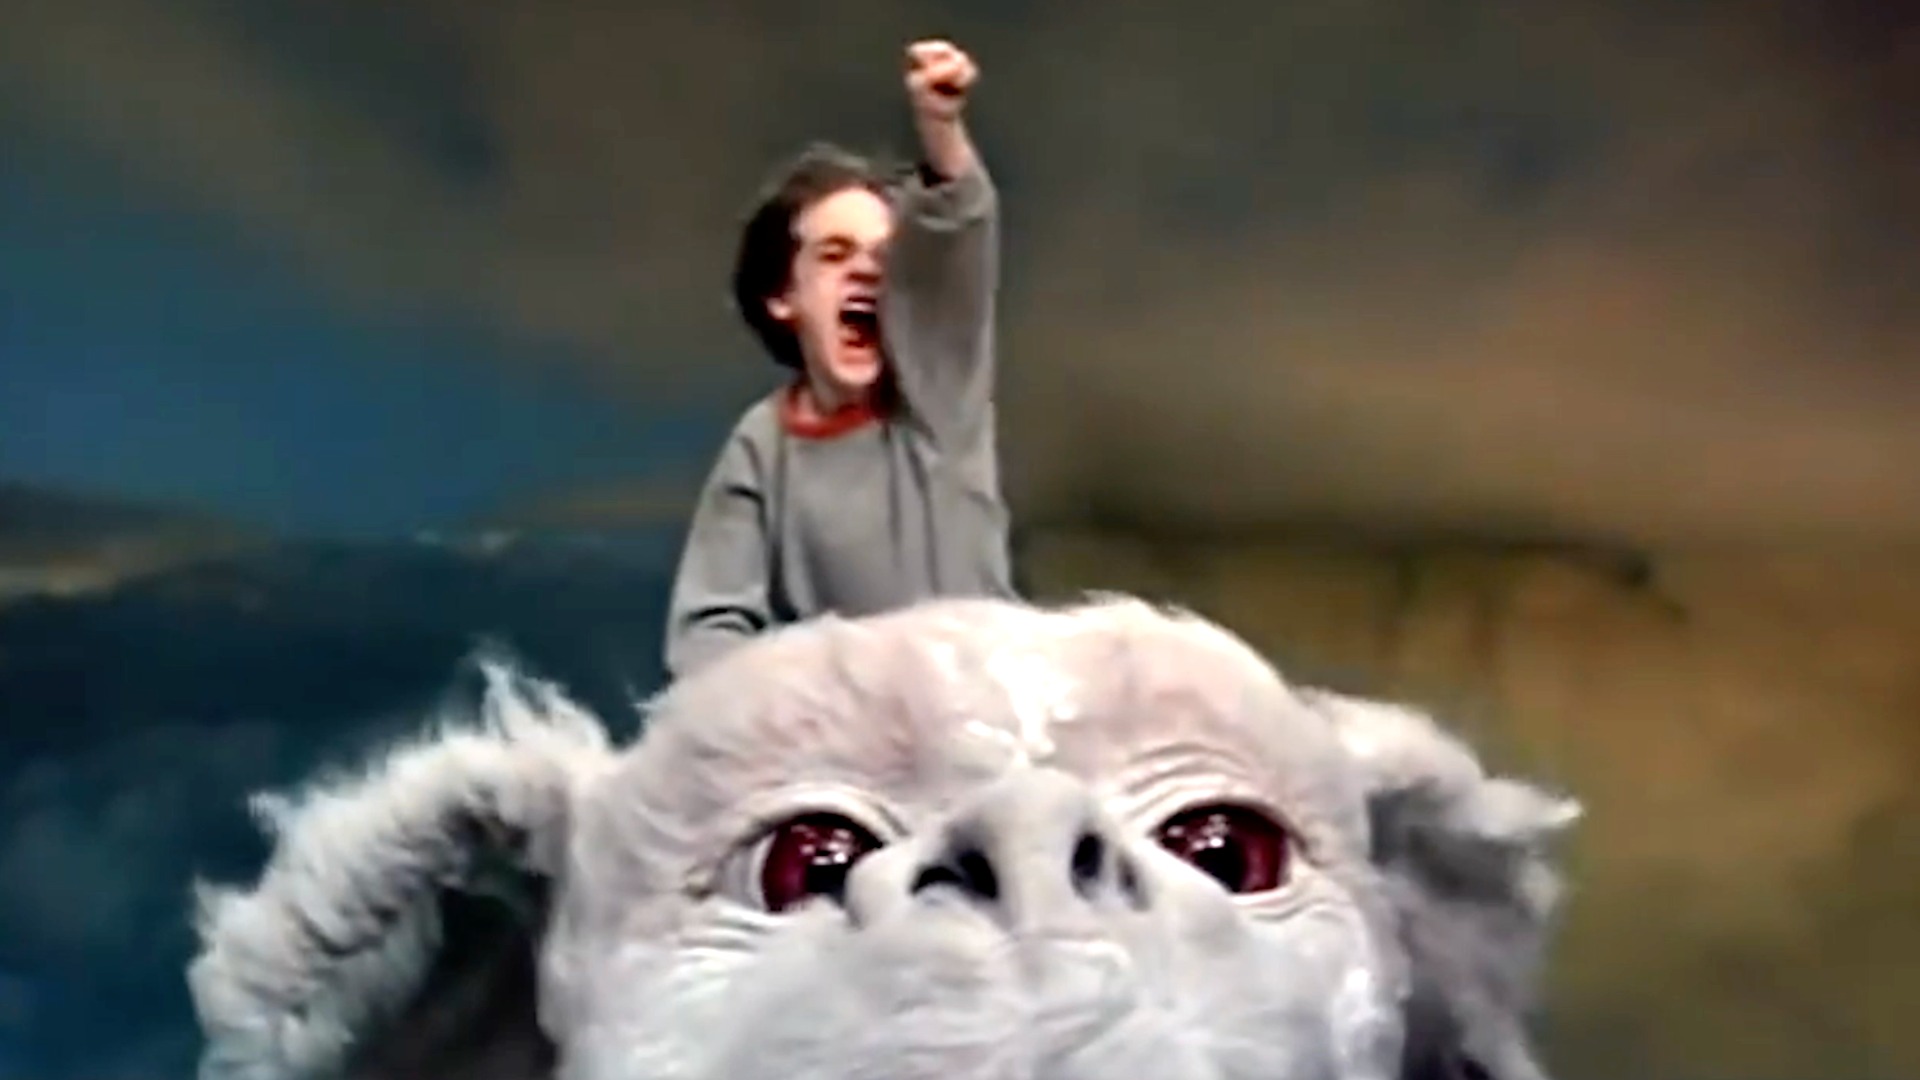 The Neverending Story Trailer 1 Trailers & Videos Rotten Tomatoes